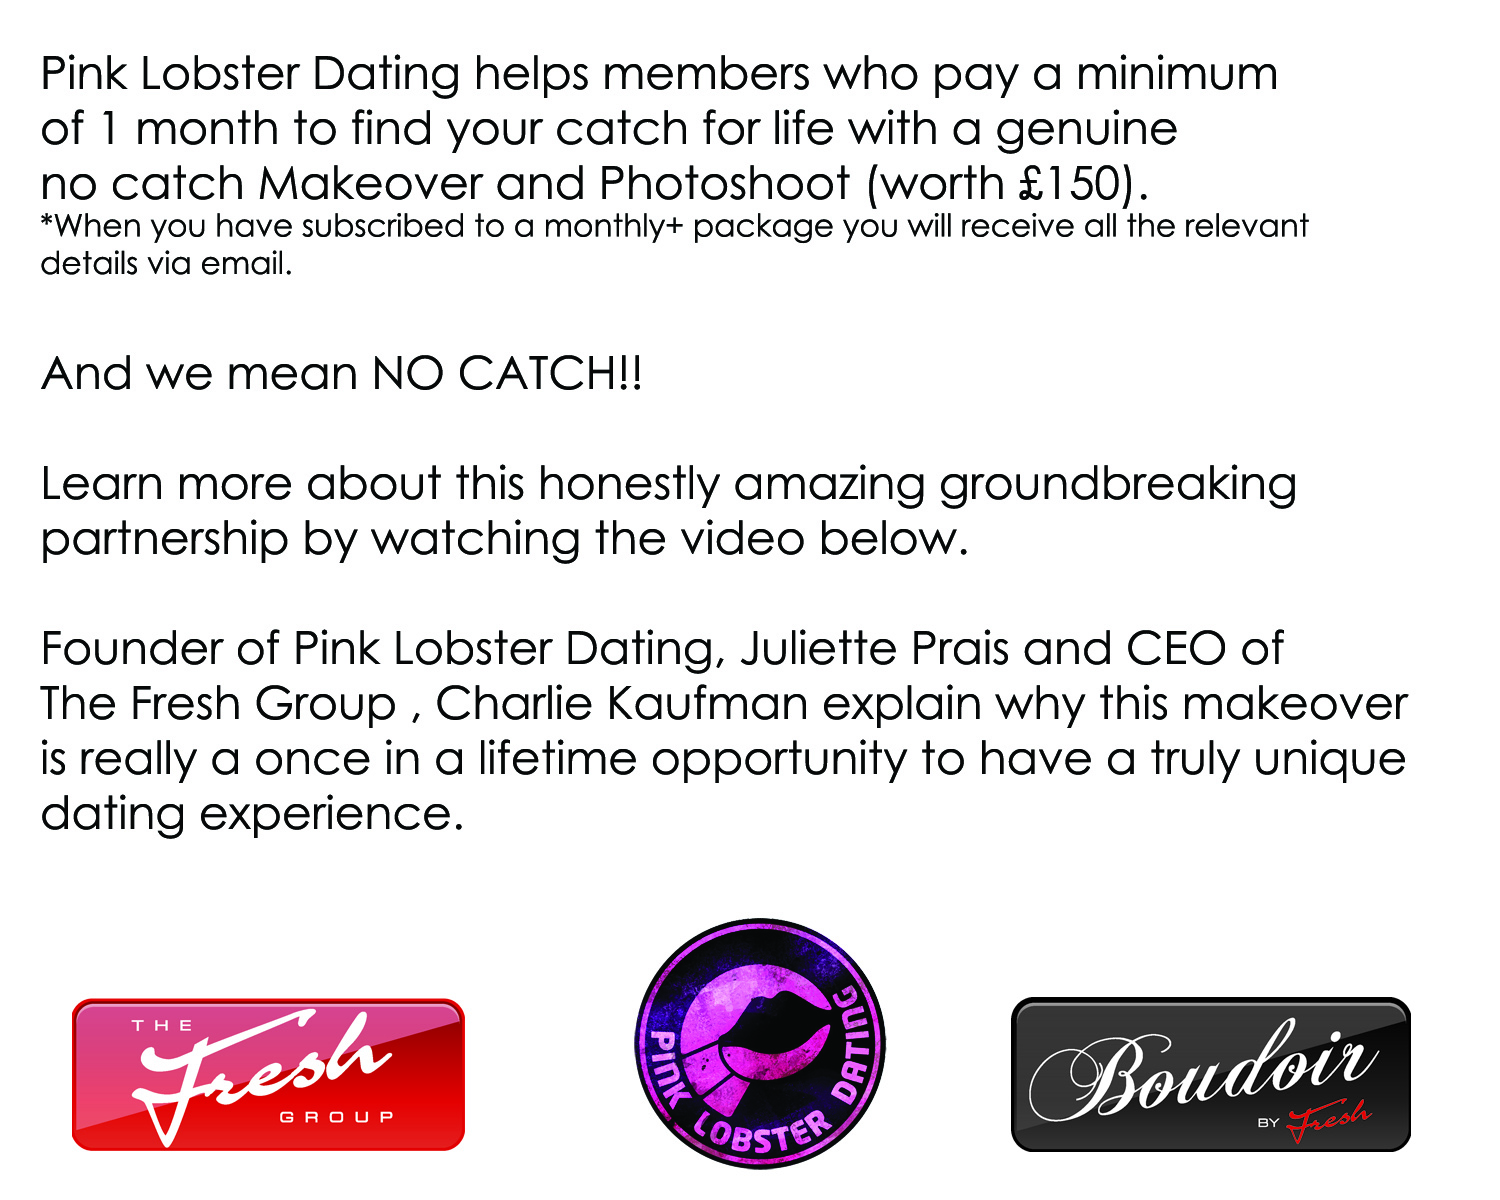 Pink Lobster Dating helps members who pay a minimum of 1 month to find your catch for life with a genuine  no catch Makeover and Photoshoot (worth £150).  And we mean NO CATCH!!  Learn more about this honestly amazing groundbreaking partnership by watching the video below.  Directors of Pink Lobster Dating, Juliette Prais and  Emma Ziff, and CEO of CCC Ltd, Charlie Kaufmann explain why this makeover is really a once in a lifetime opportunity to have a truly unique dating experience.   